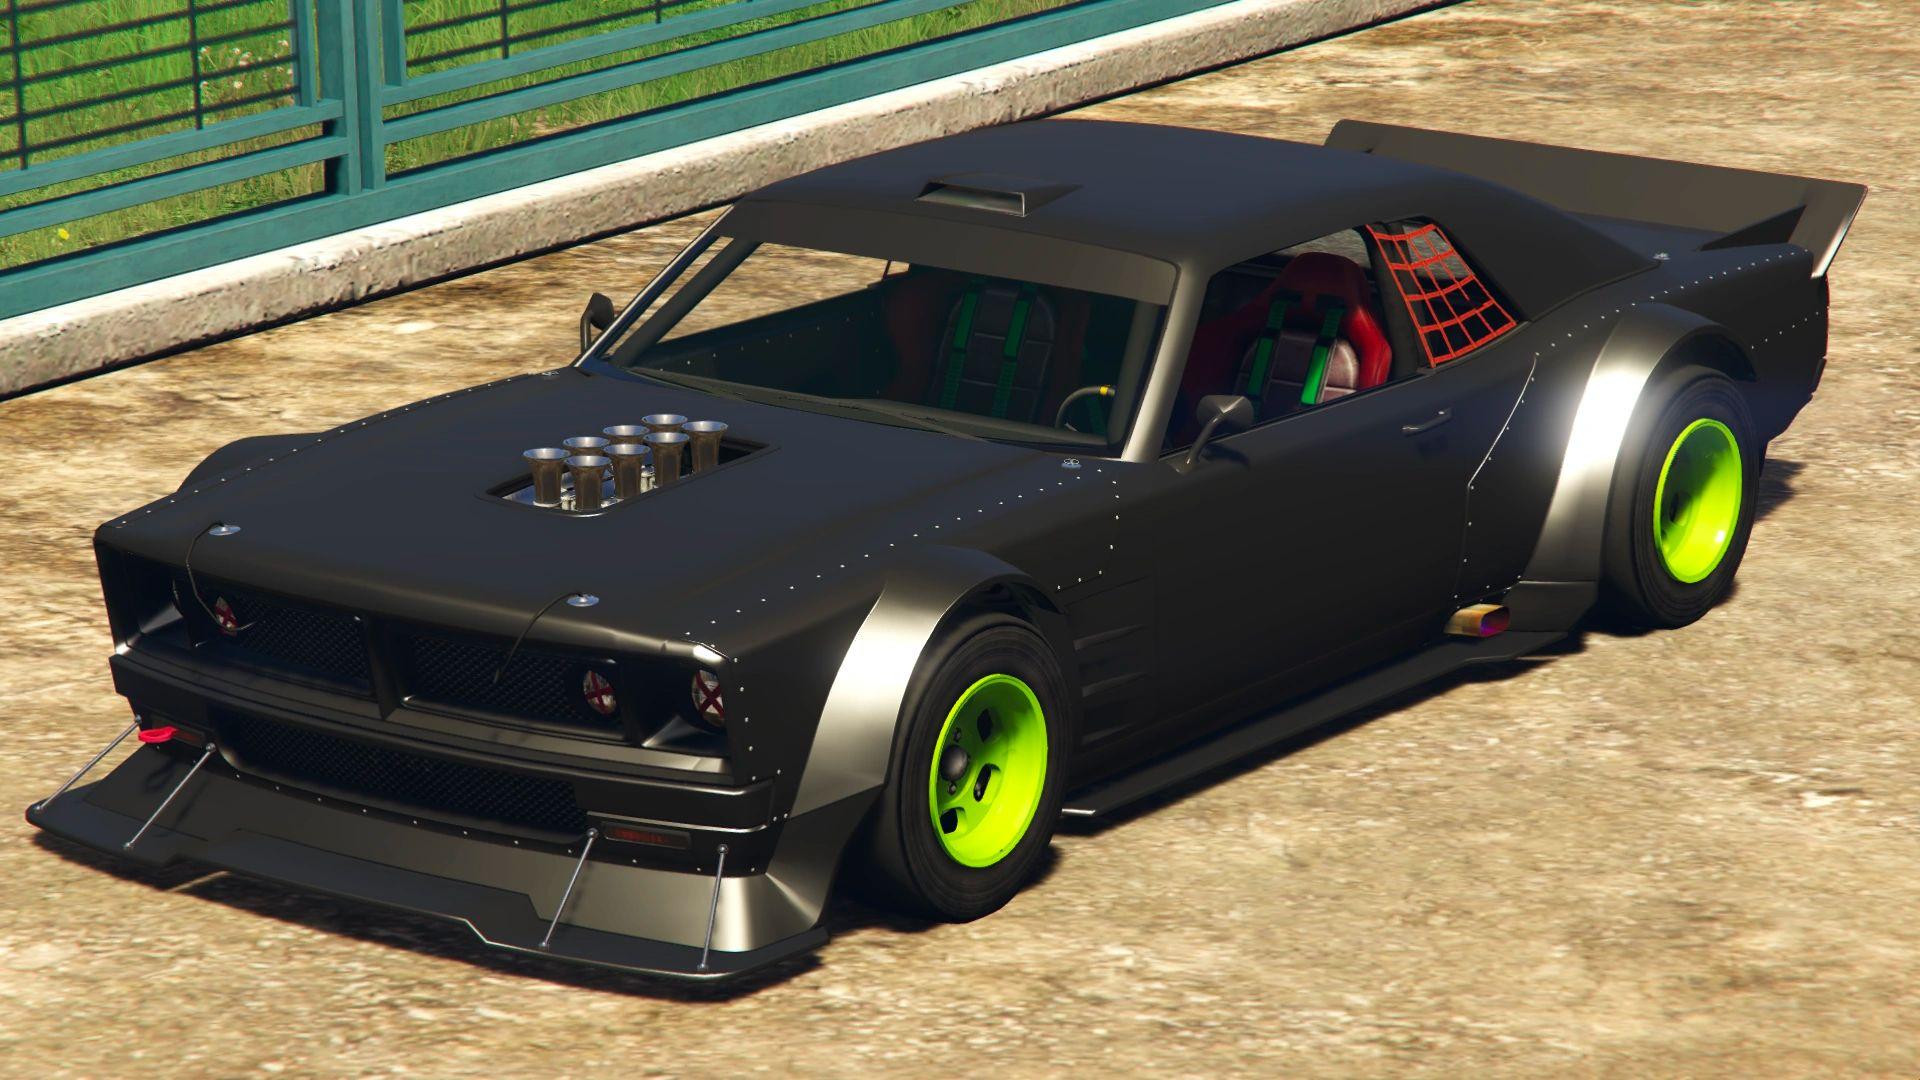 Black and Green Declasse Drift Tampa parked up in GTA Online.